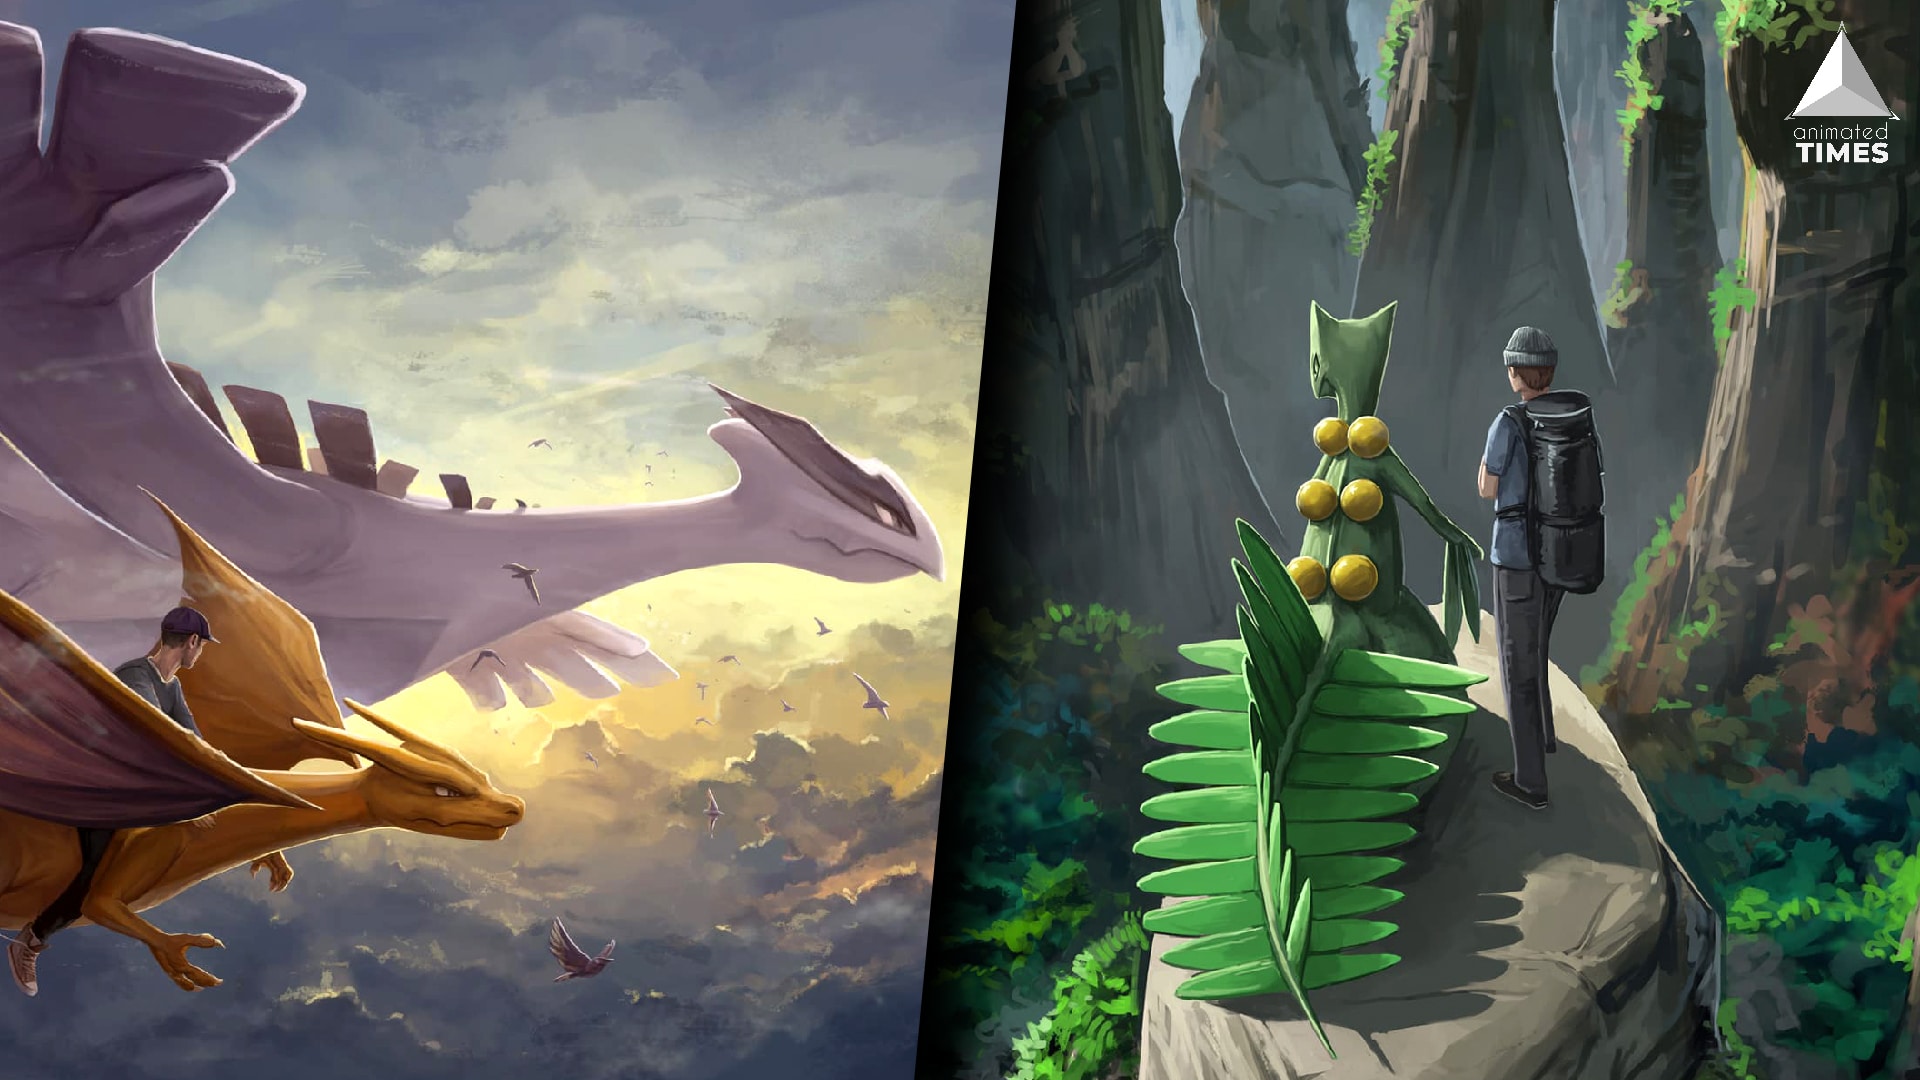 8 Incredible Pokemon Concept Arts to Give You Serious Travel Goals